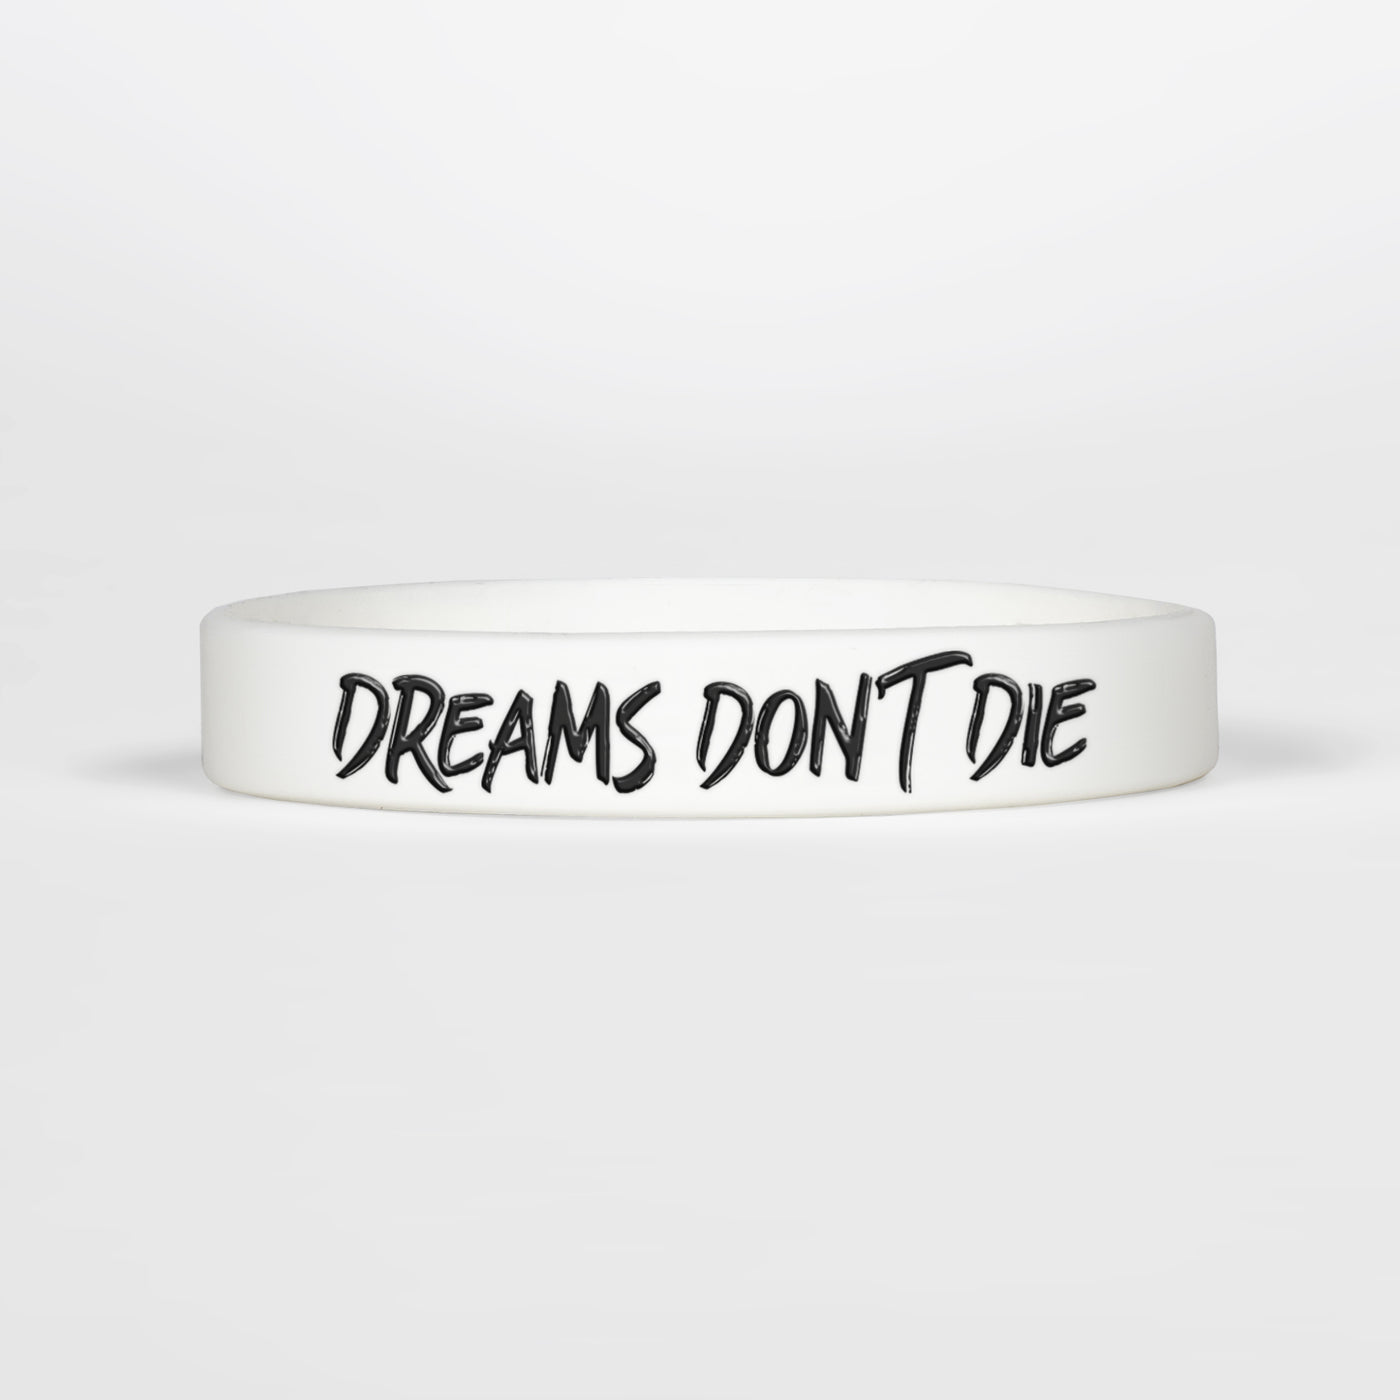 Dreams Don't Die Motivational Wristband